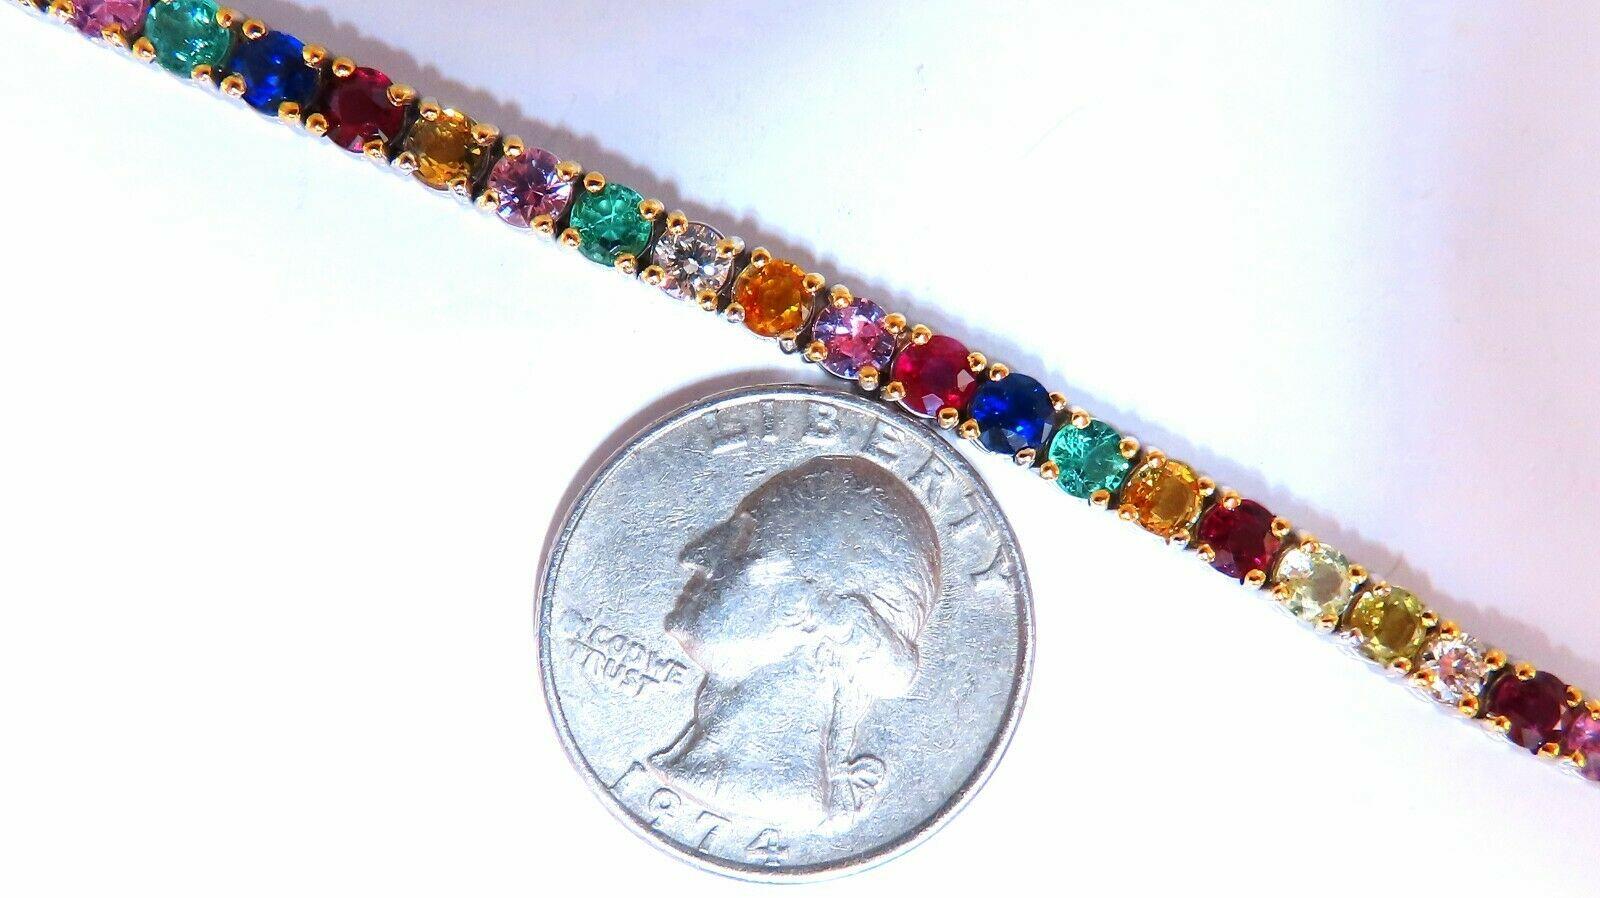 Gem Line.

9.80ct. Natural Sapphires, Ruby, & Emeralds bracelet.

Full round cuts, great sparkle.

Multicolor sapphires.

Vibrant Greens, Orange, Reds, yellows, Blues & Pinks

Clean Clarity & Transparent.

Secure pressure clasp and safety